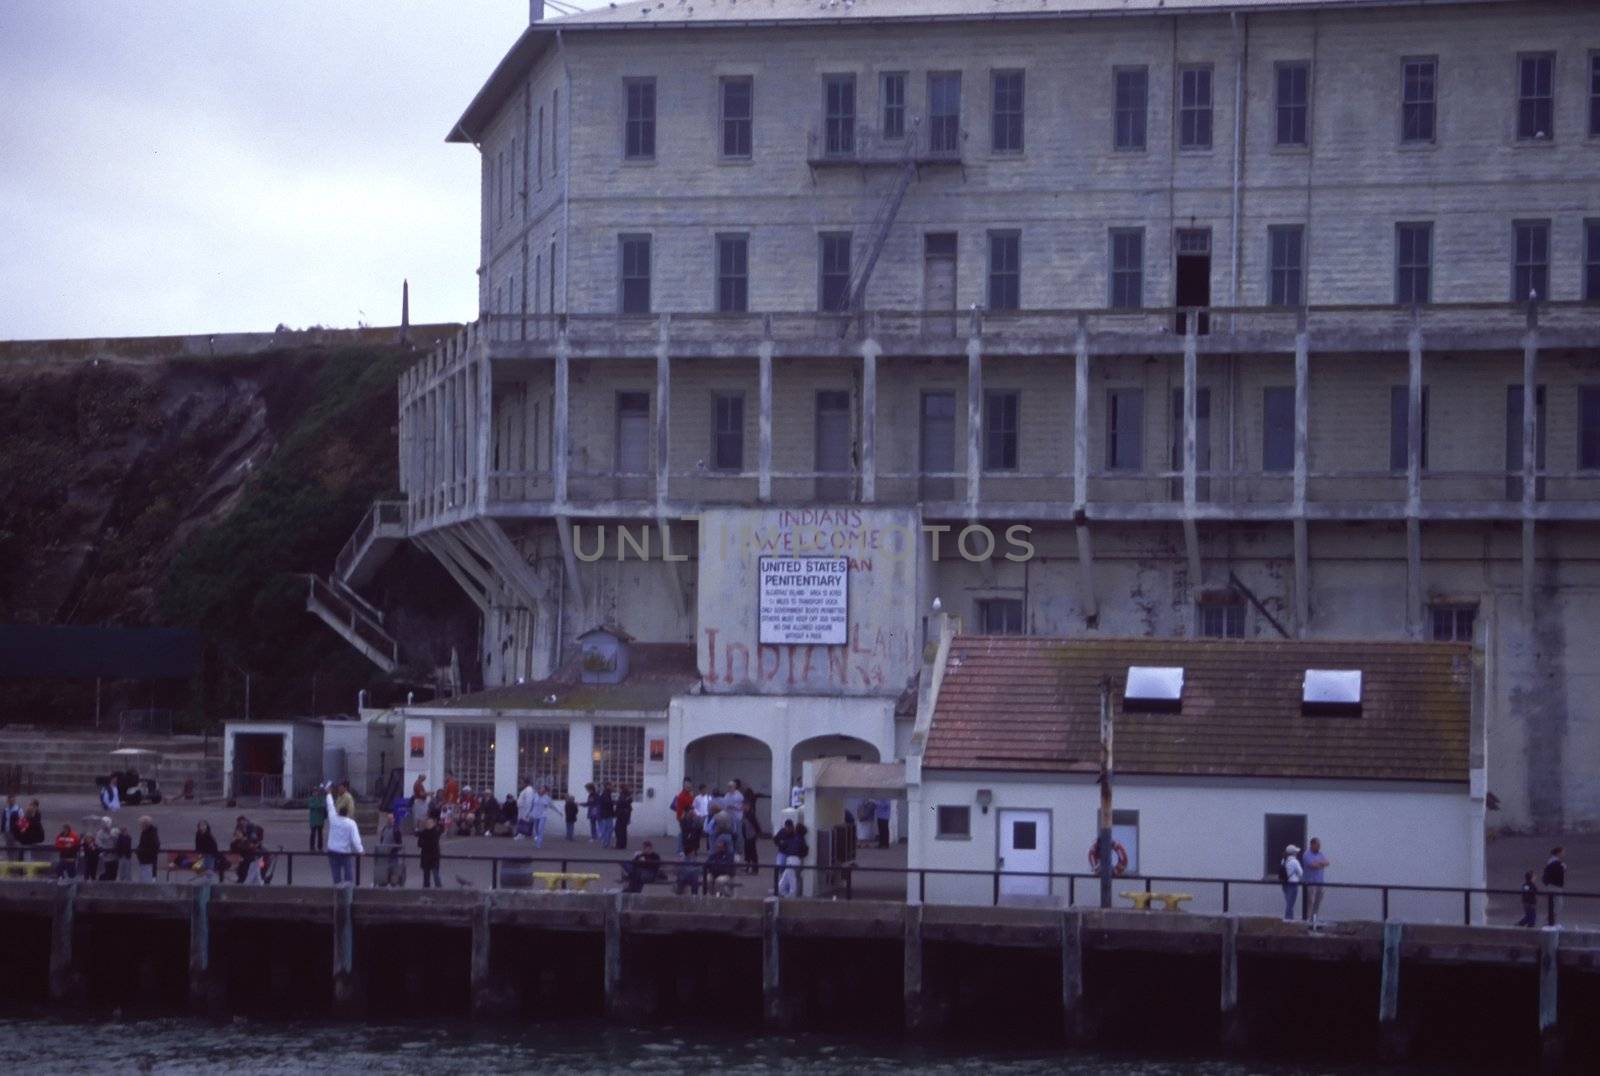 Alcatraz Island (sometimes informally referred to as simply Alcatraz or by its pop-culture name, The Rock)